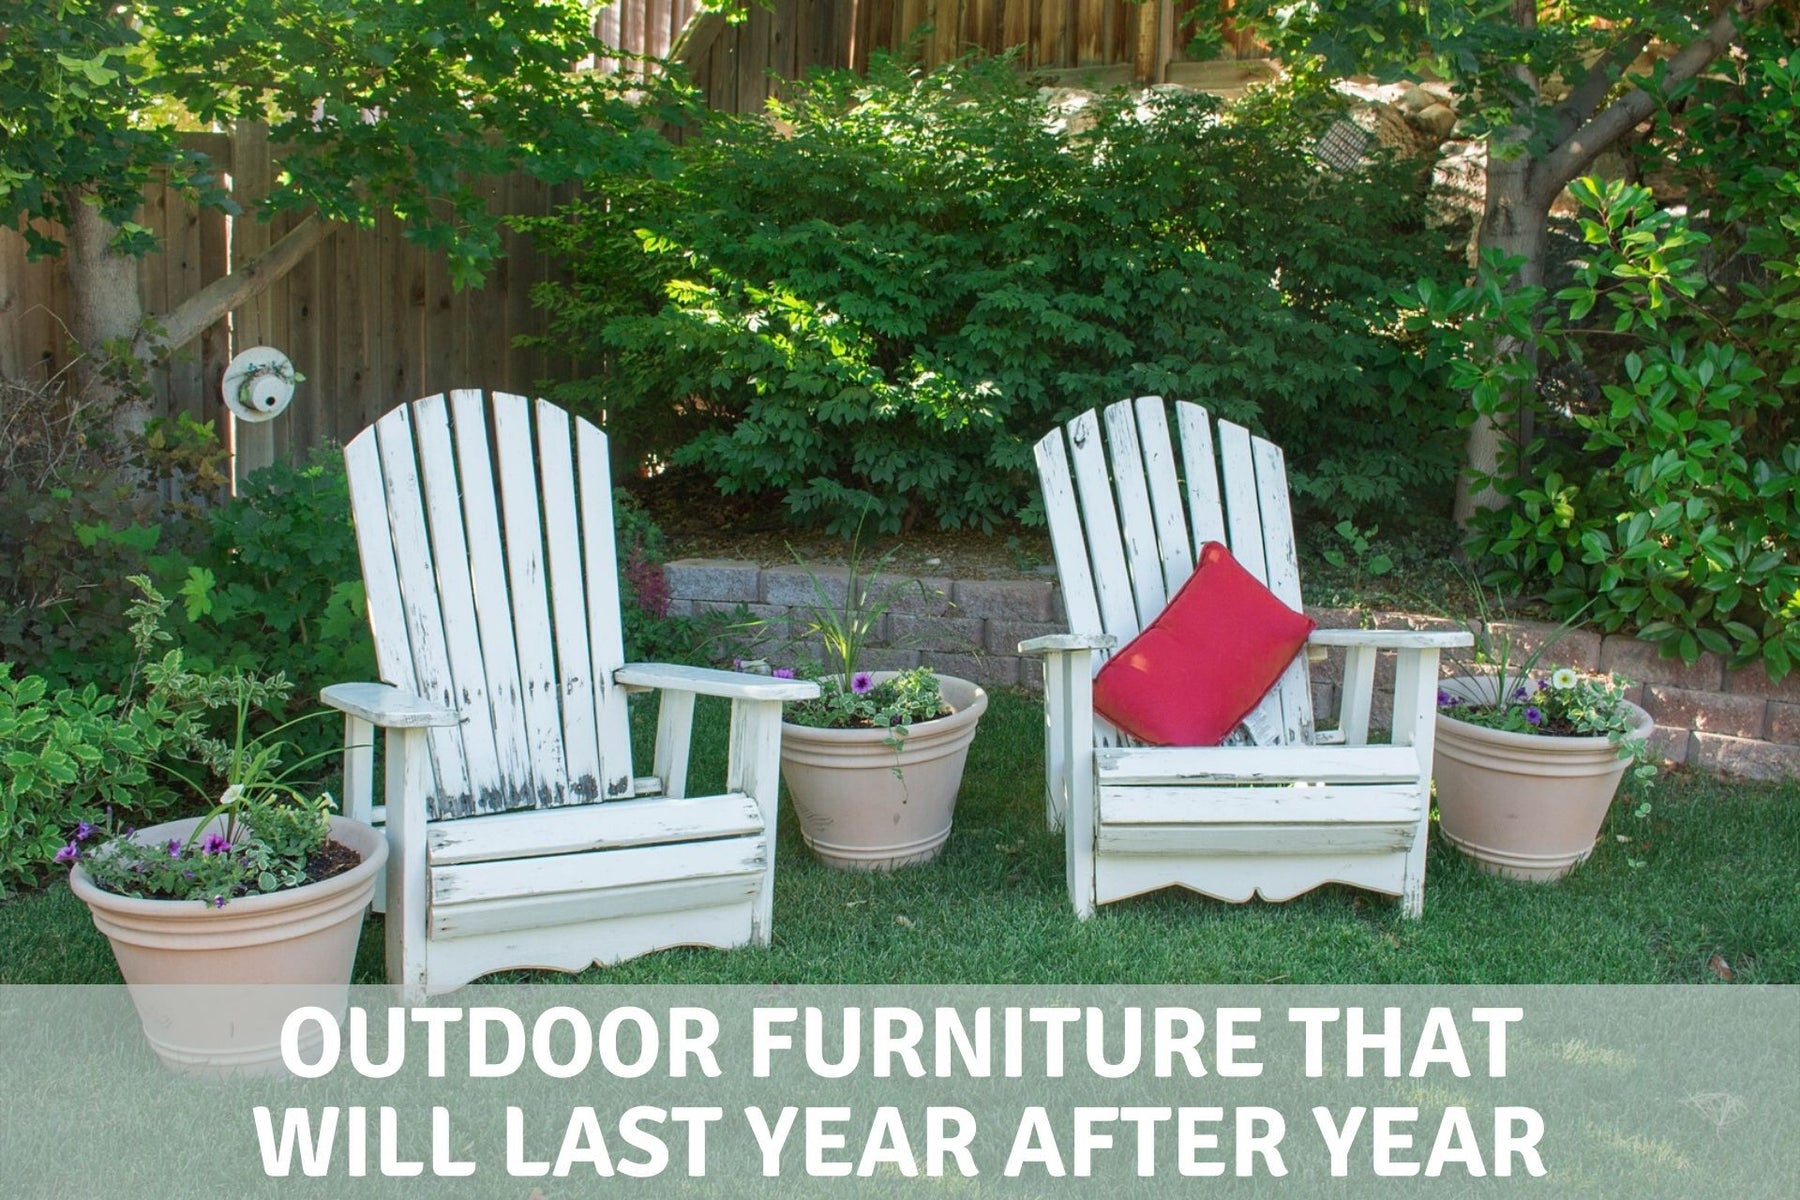 Furniture - Outdoor Furniture That Will Last Year After Year